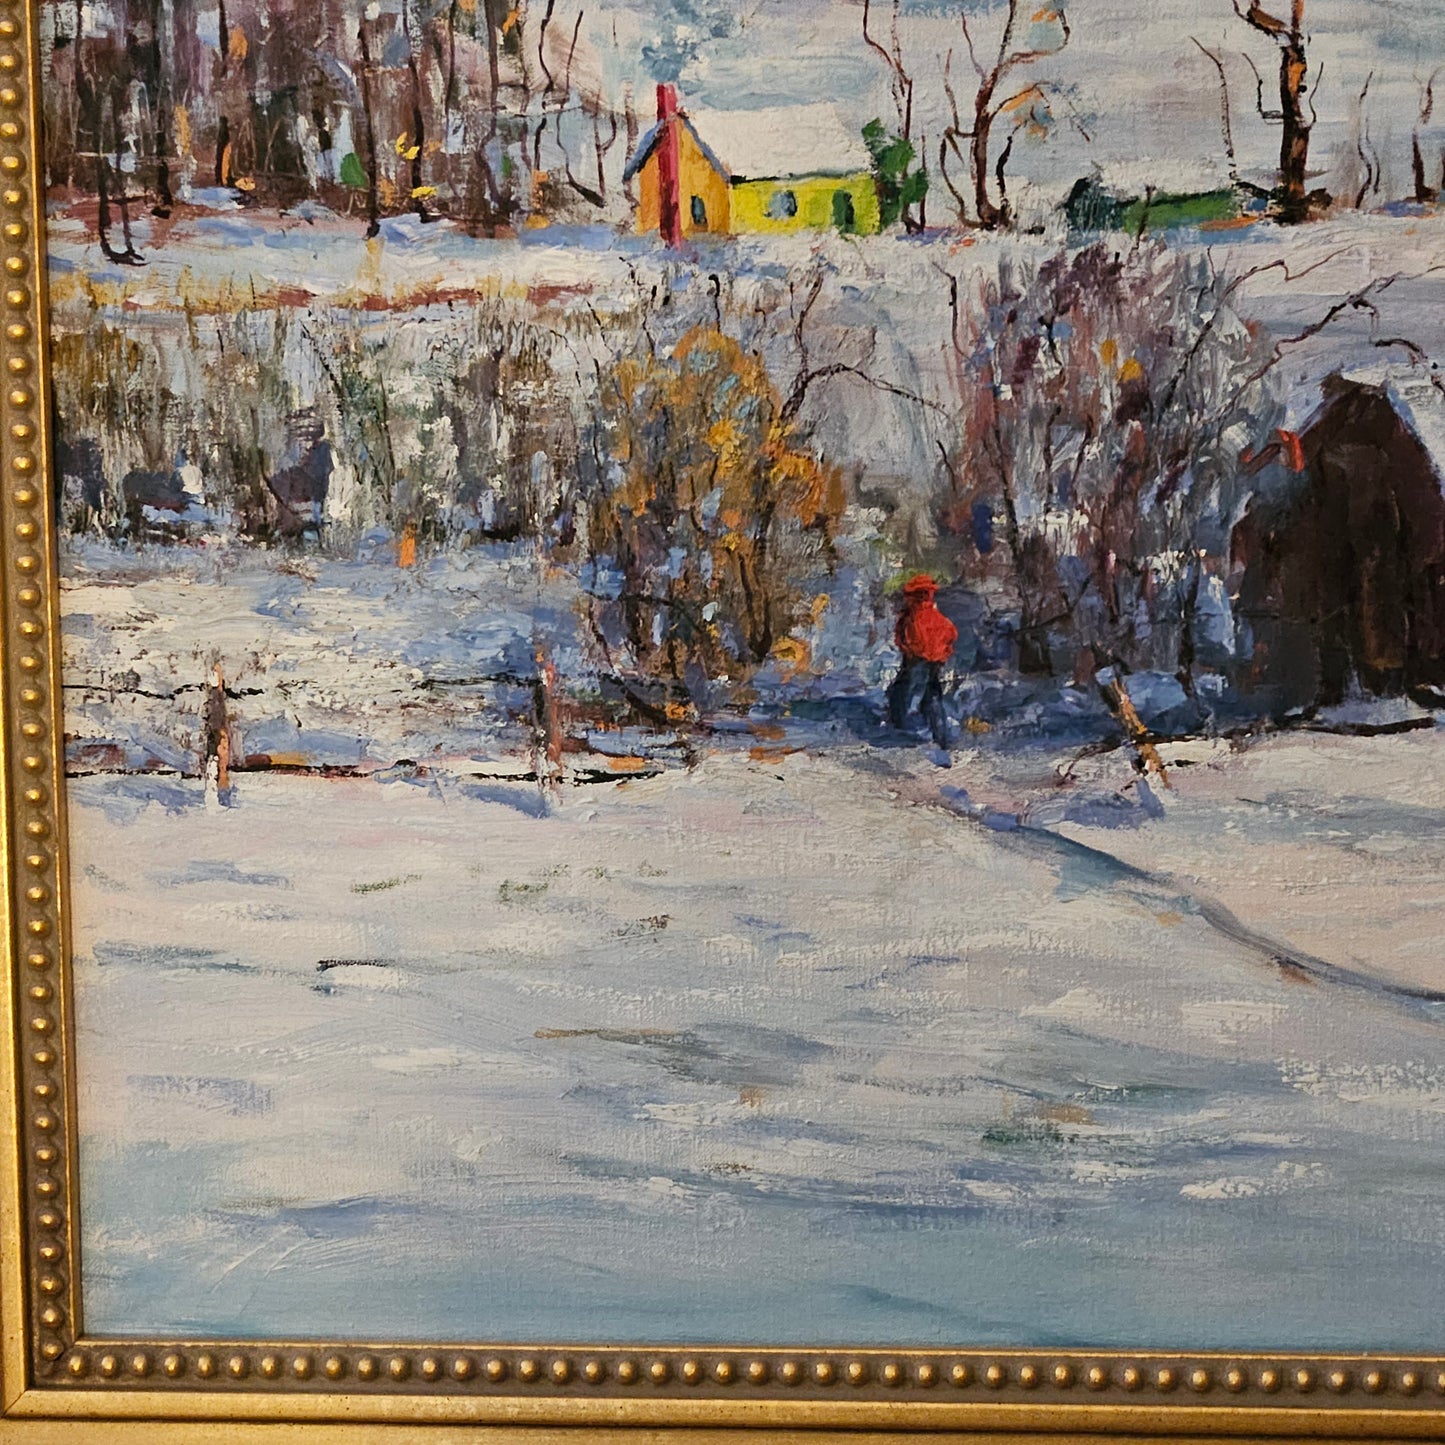 Vintage Signed Oil on Board Painting by Richard Schultz "All Most Home"